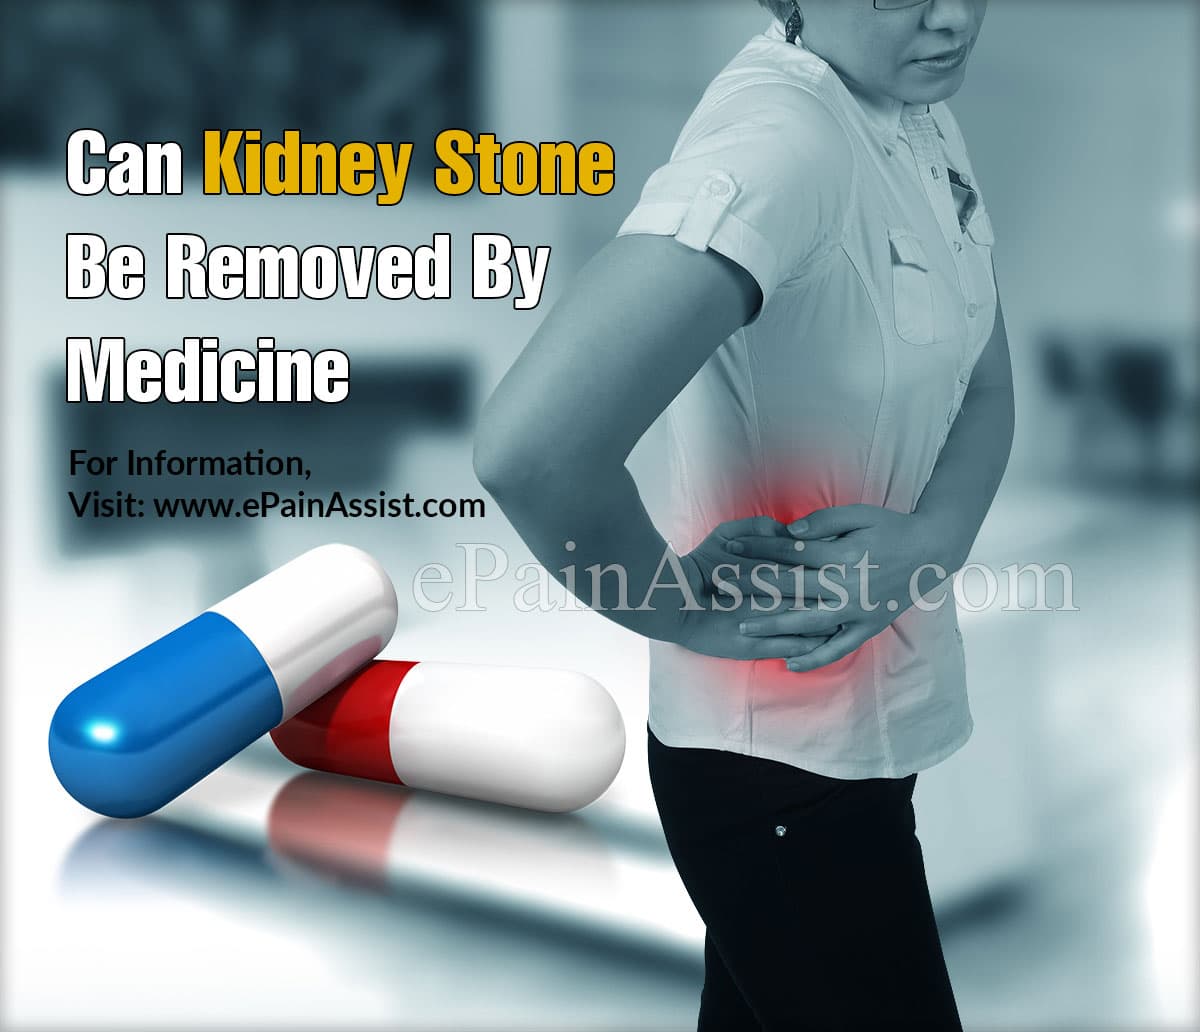 Can Kidney Stone Be Removed By Medicine